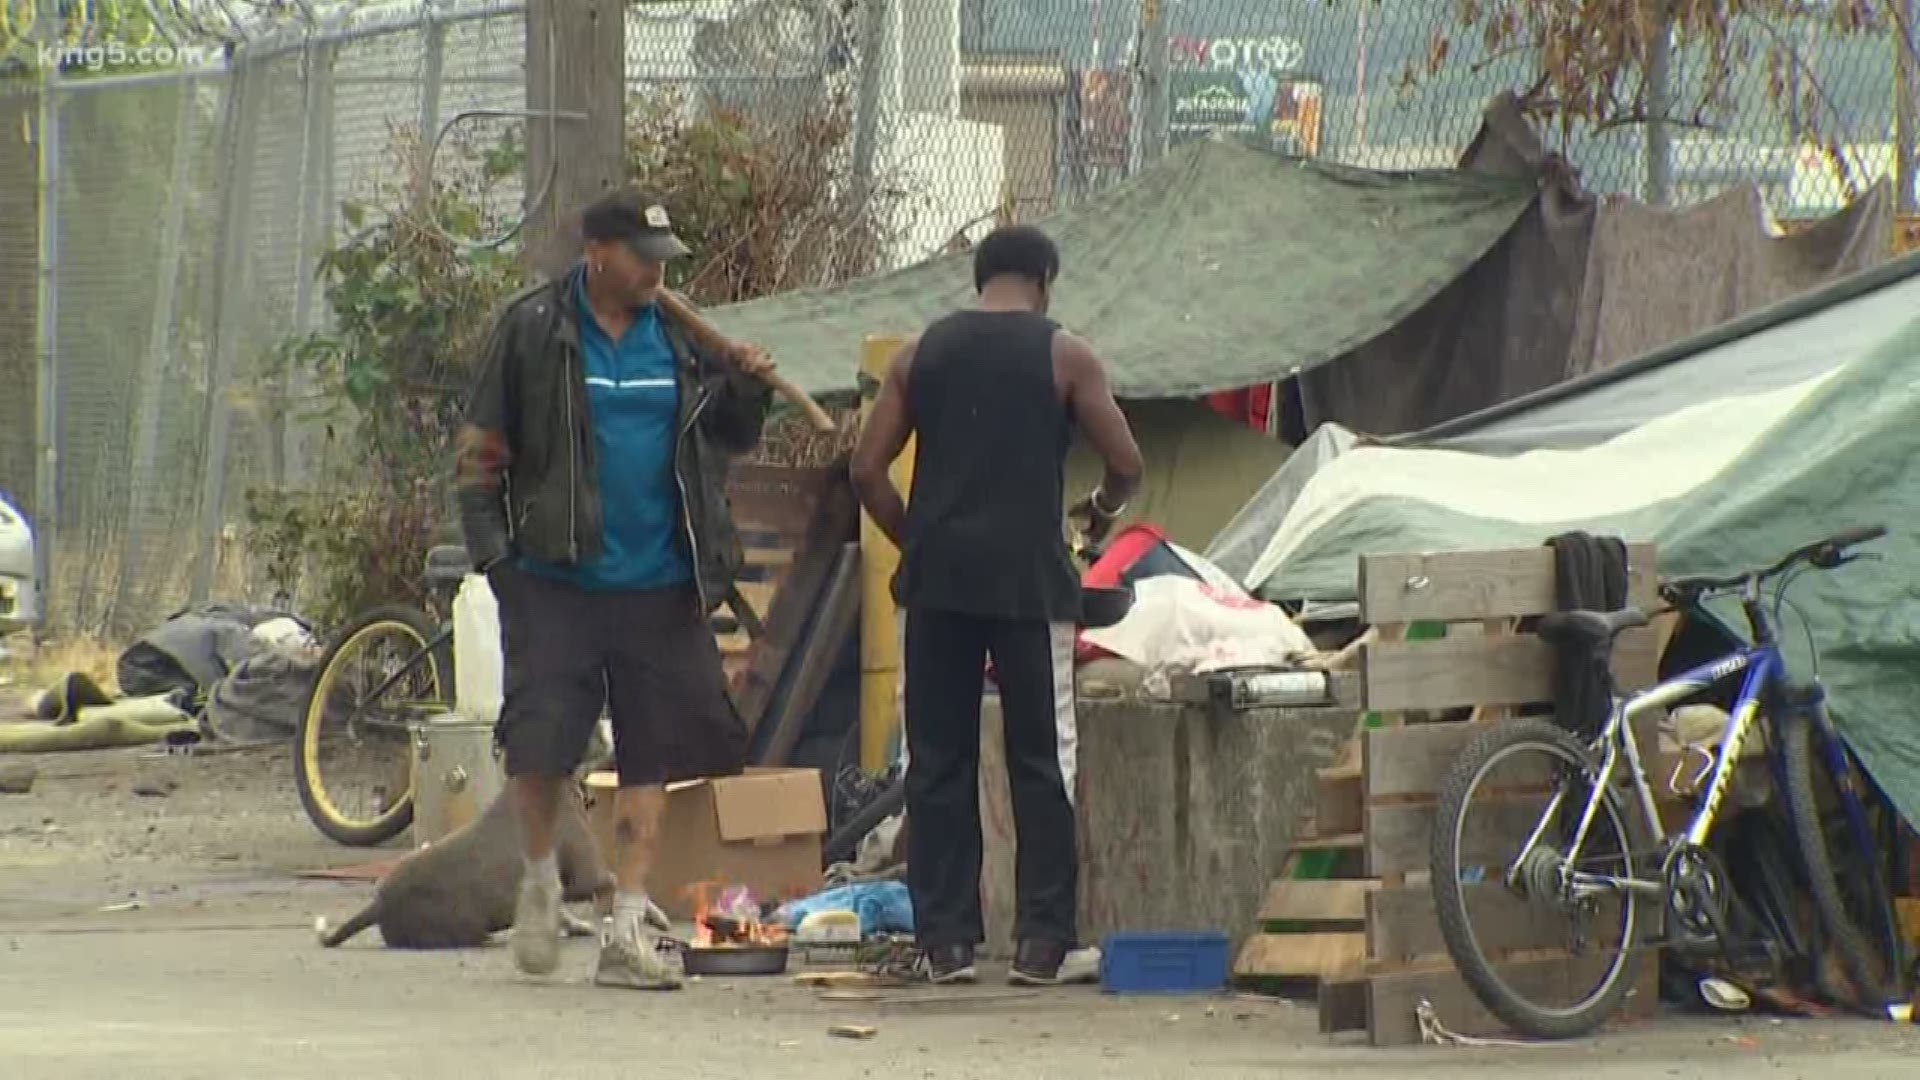 The city of Seattle said they have no plans to remove a homeless encampment along Utah Ave. S., a stretch of road that becomes a popular place for tailgaters.